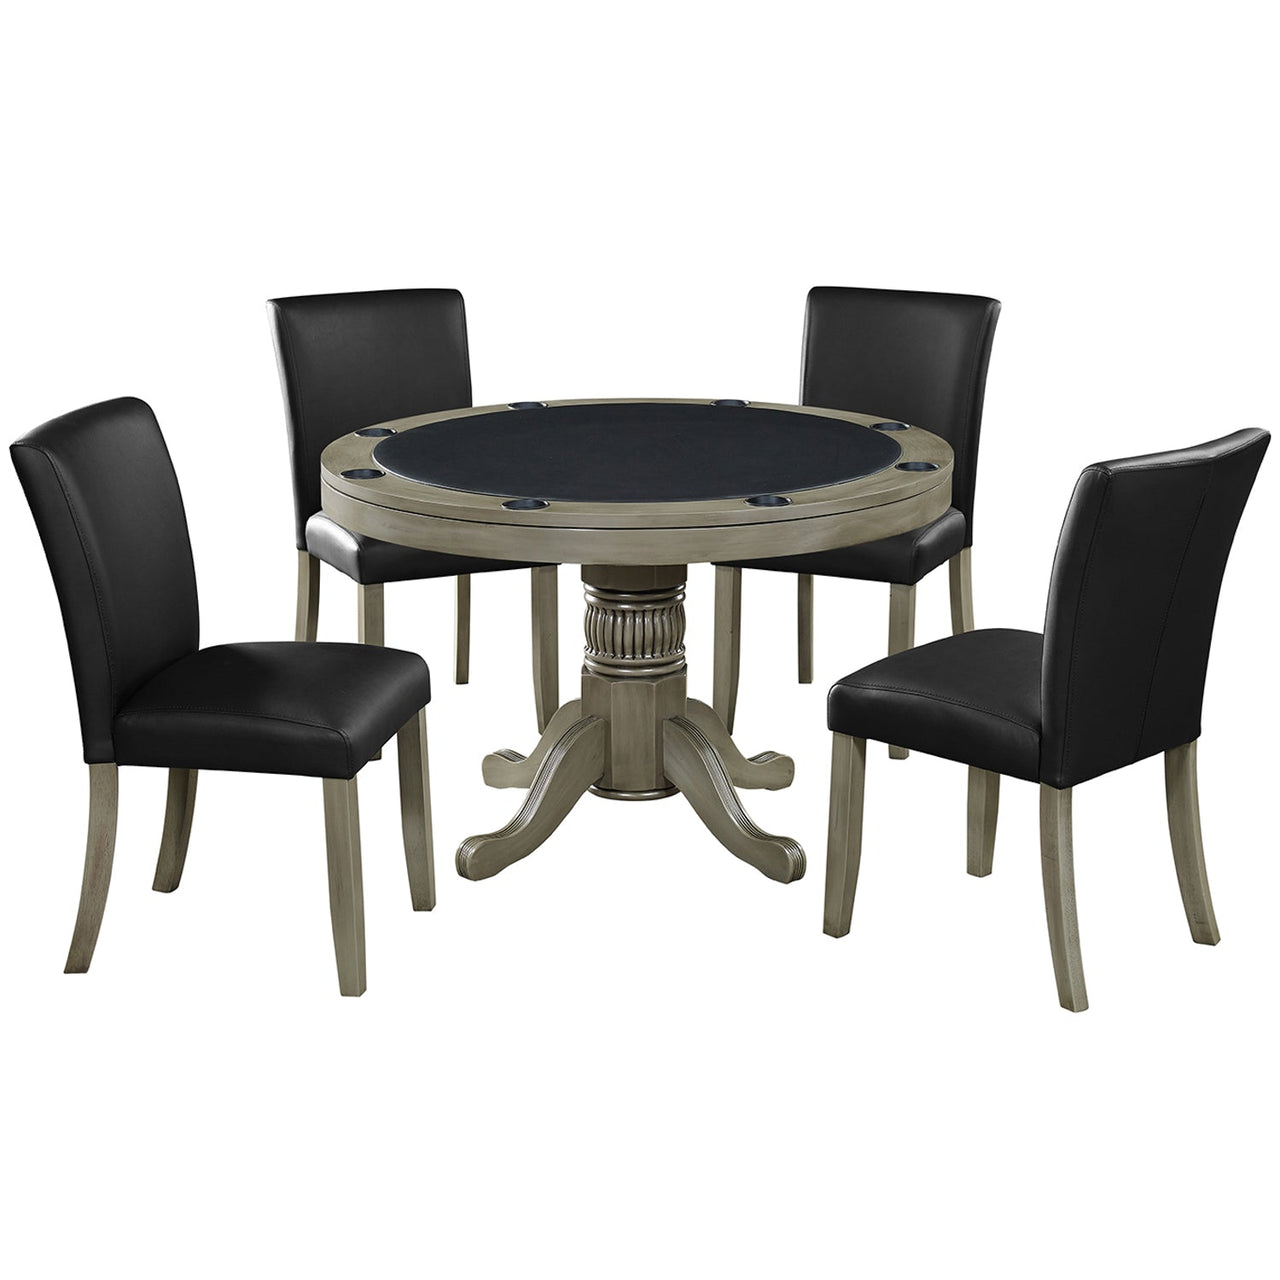 RAM Game Room Round Poker Table Set with Matching Wood Chairs-AMERICANA-POKER-TABLES